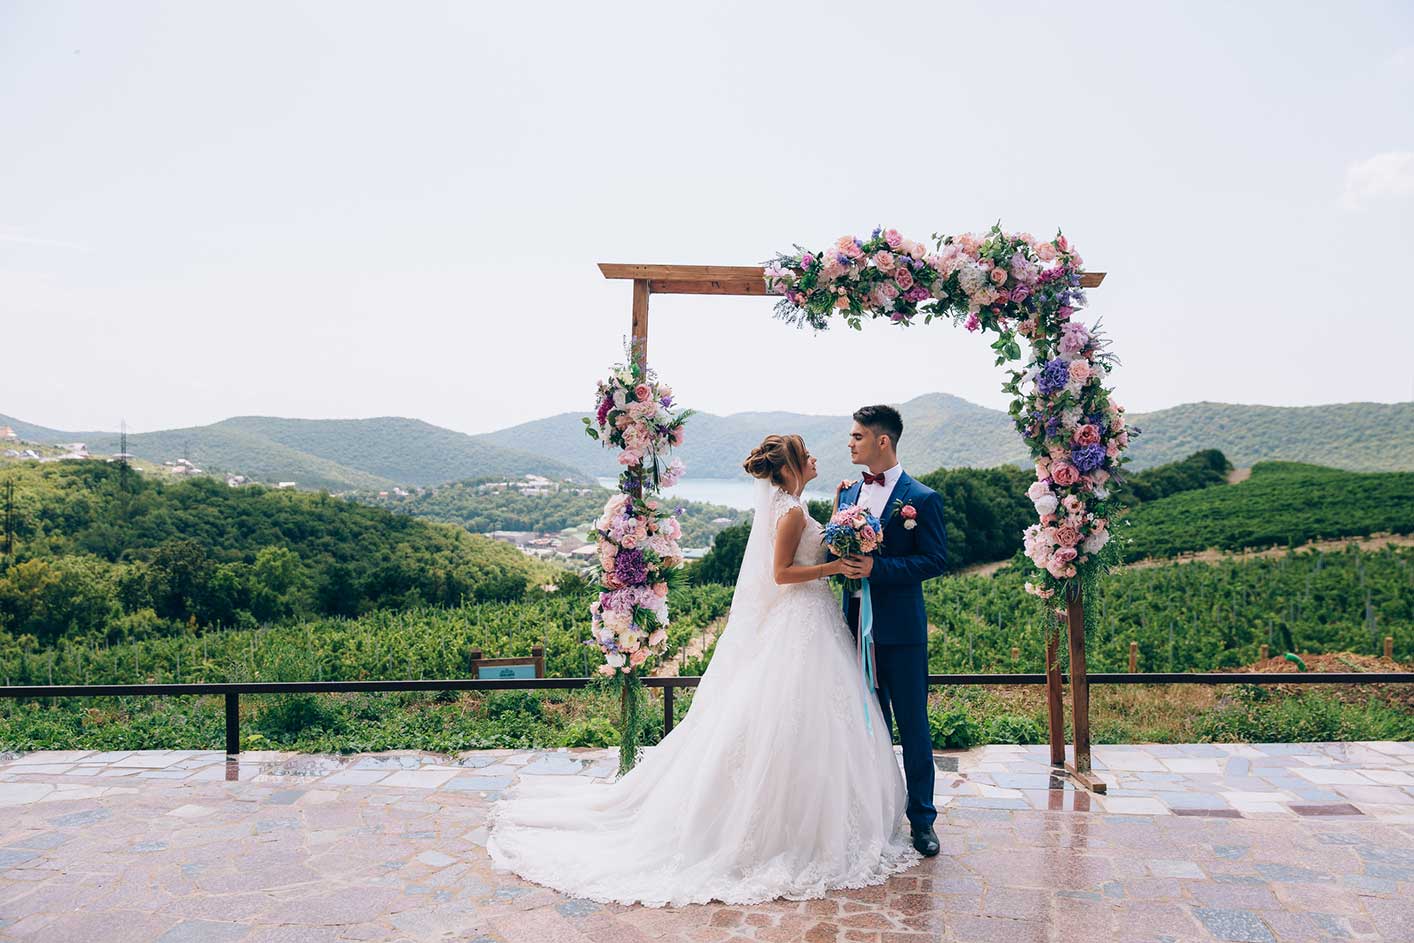 Gorgeous Wedding Backdrops That Aren't Fabric